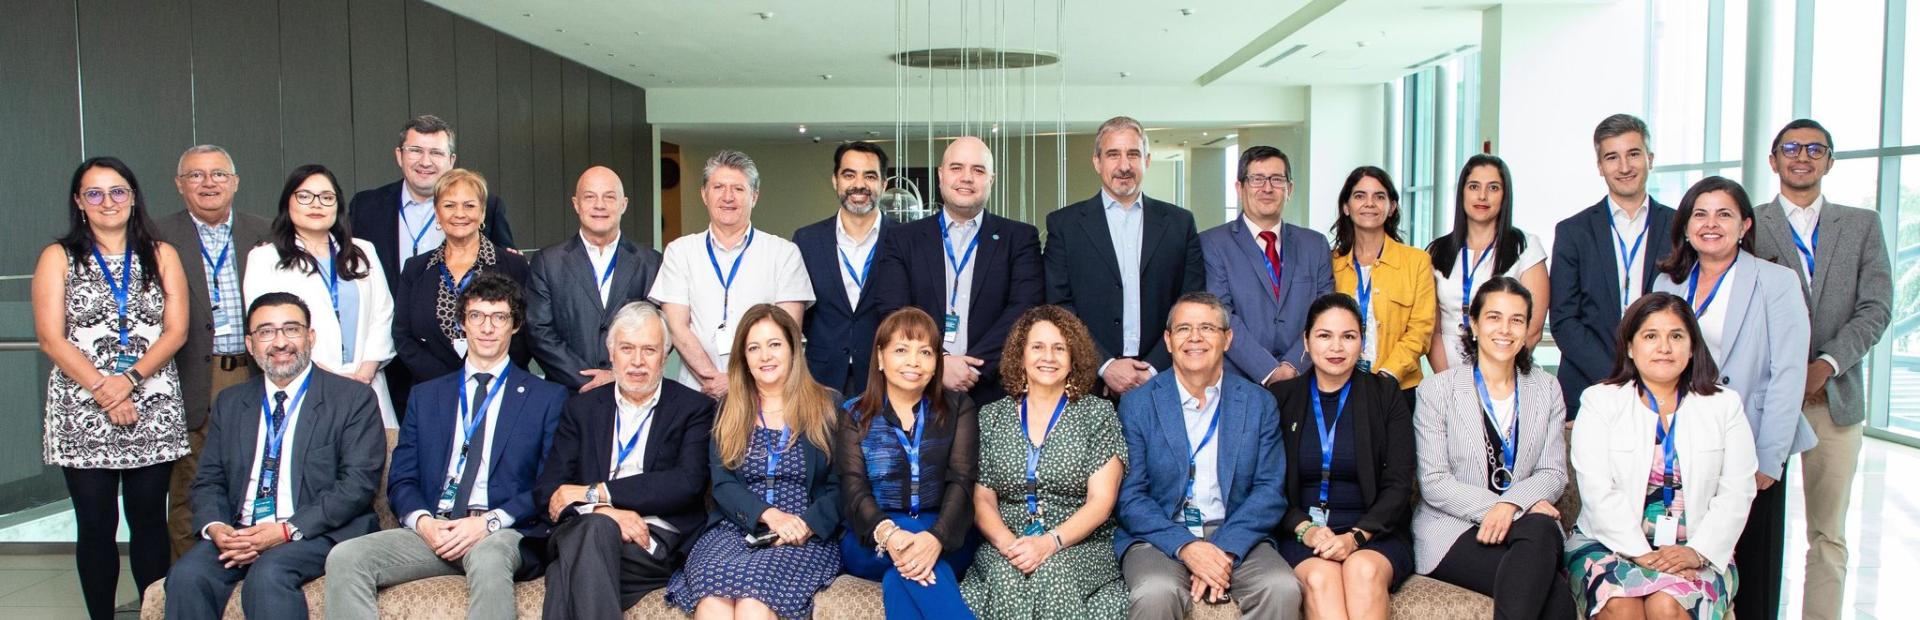 Launch of the Latin American and Caribbean Network of Agrifood Trade Experts (RECA).   